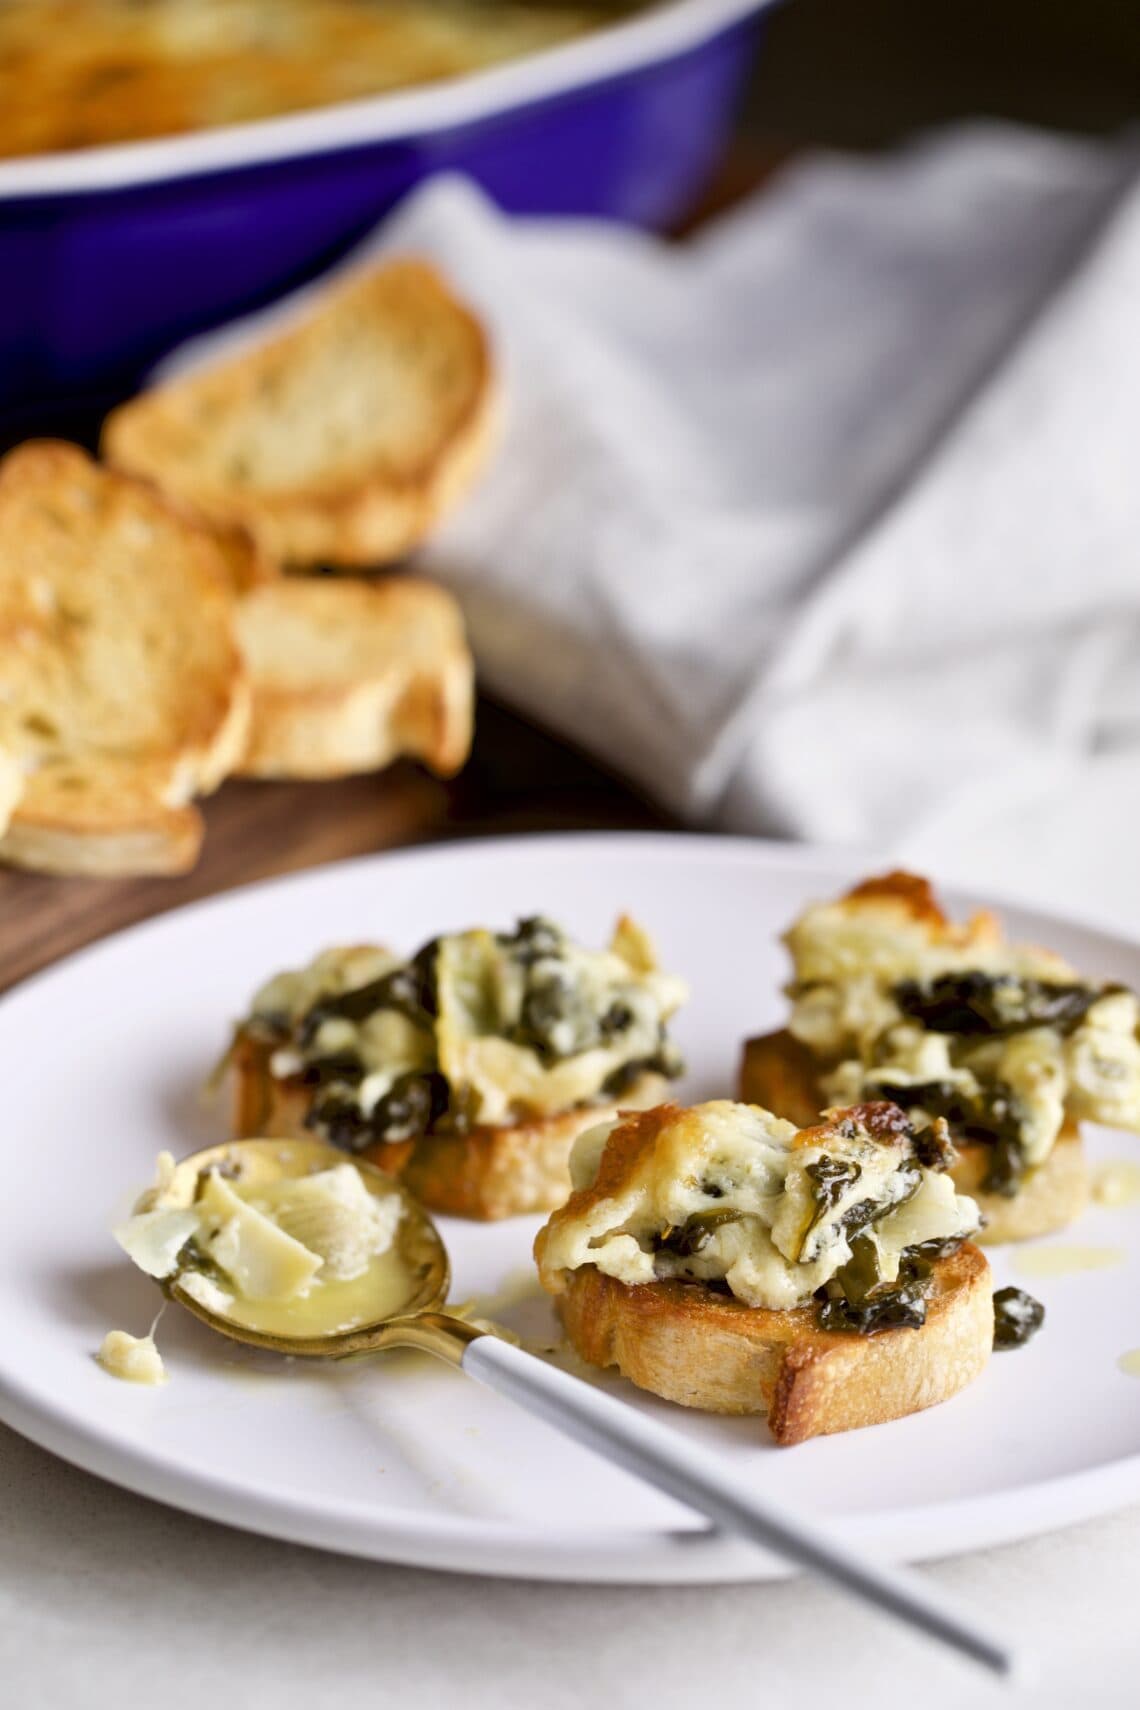 Hot mascarpone spinach and artichoke dip served on bread